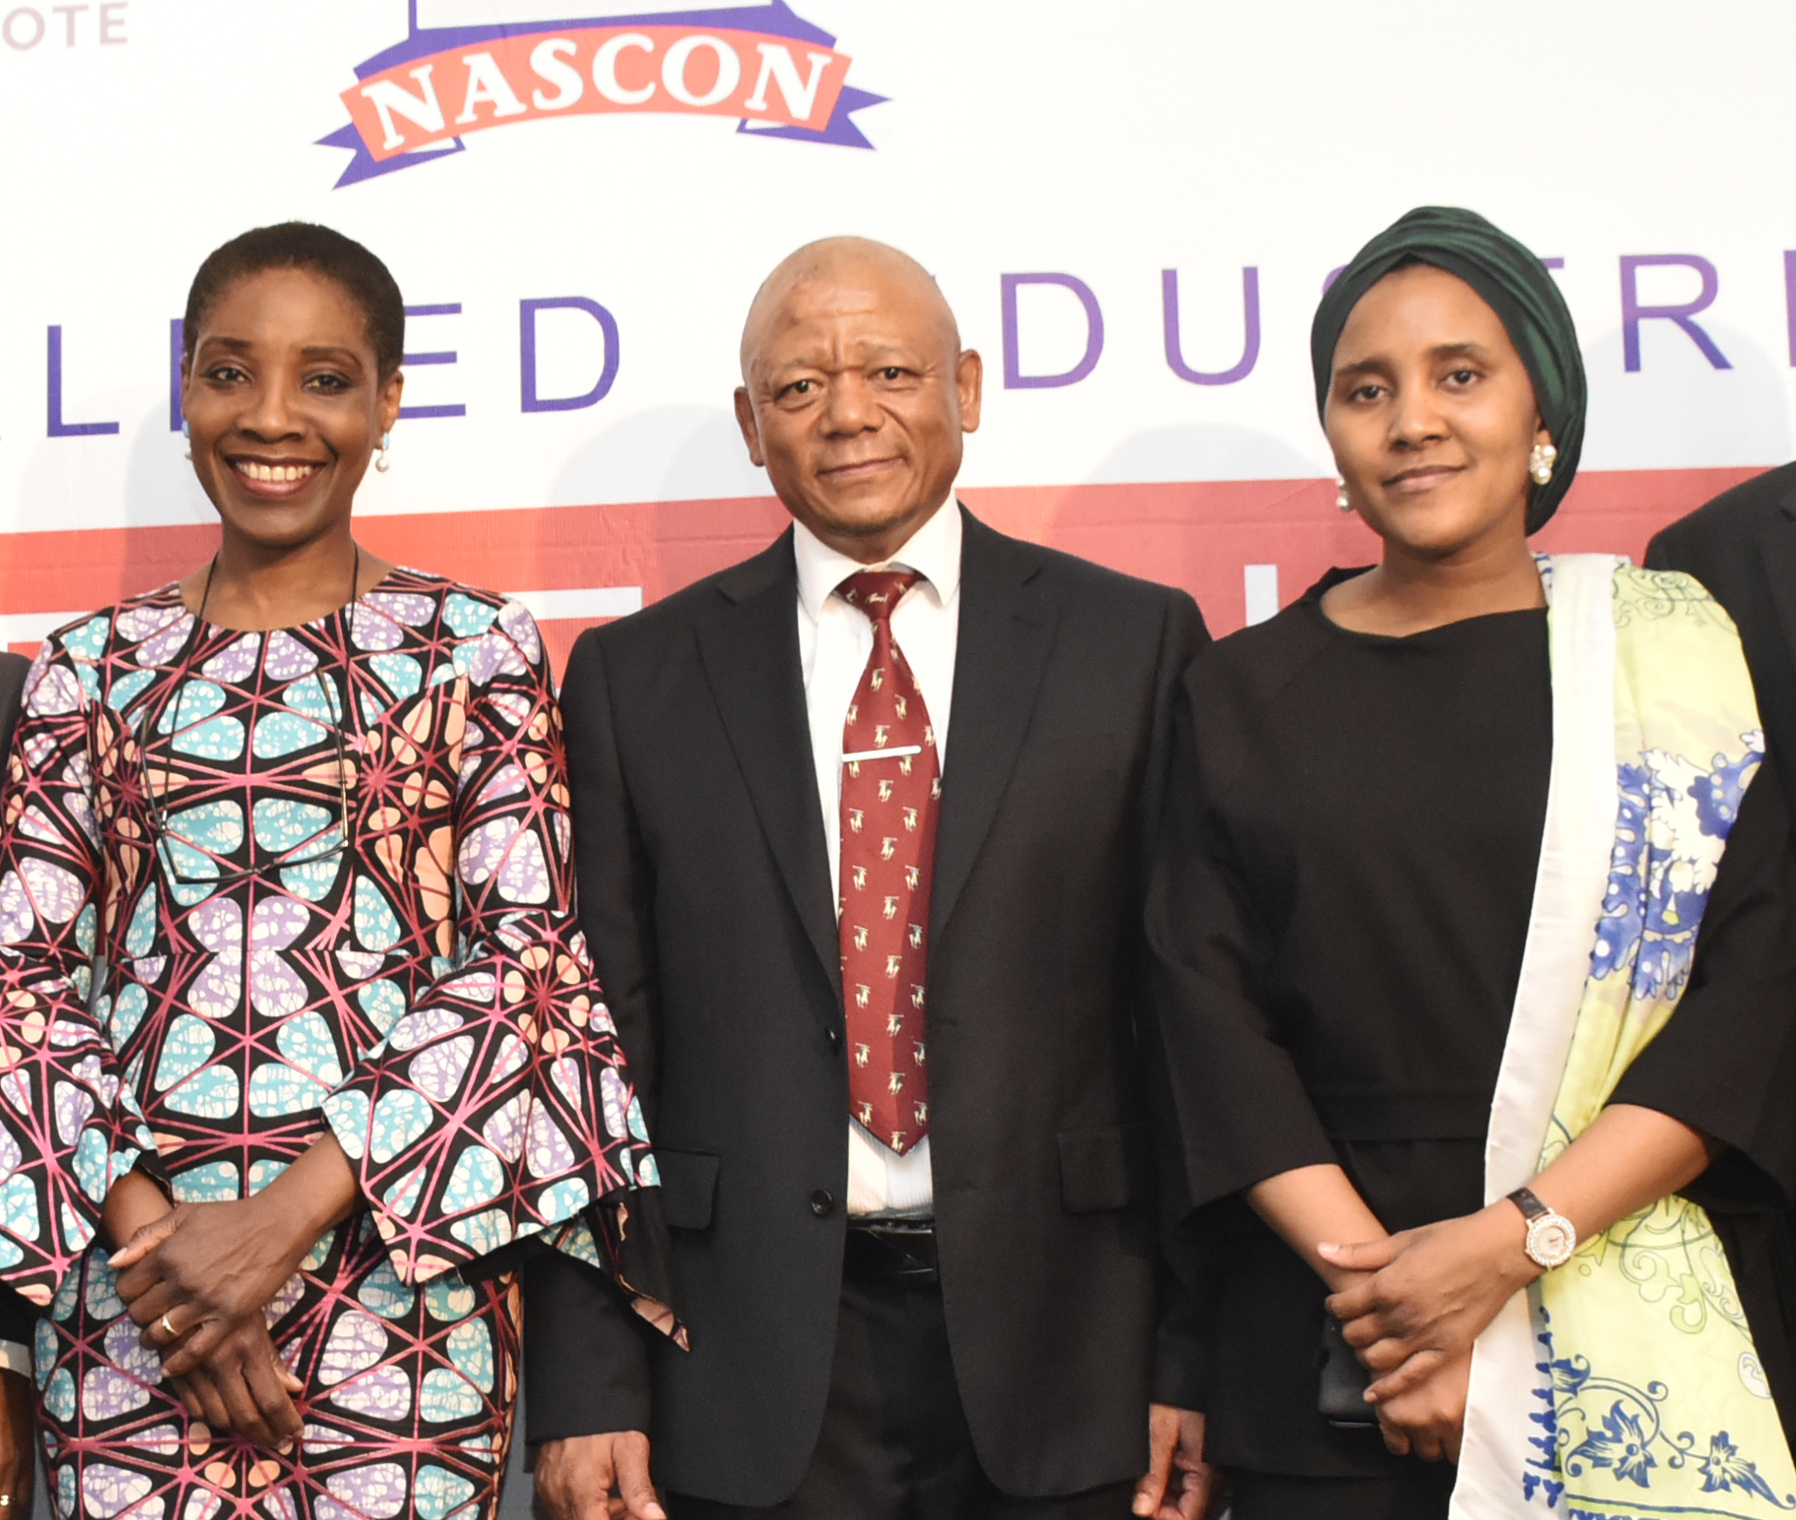 L-R: Chairperson, NASCON Allied Industries Plc, 'Yemisi Ayeni; Acting Managing Director, NASCON Allied Industries Plc, Thabo Mabe; and Executive Director, Commercial, NASCON Allied Industries Plc, Fatima Aliko Dangote, at the 2021 Annual General Meeting (AGM) of NASCON Allied Industries Plc in Lagos on June 3, 2022